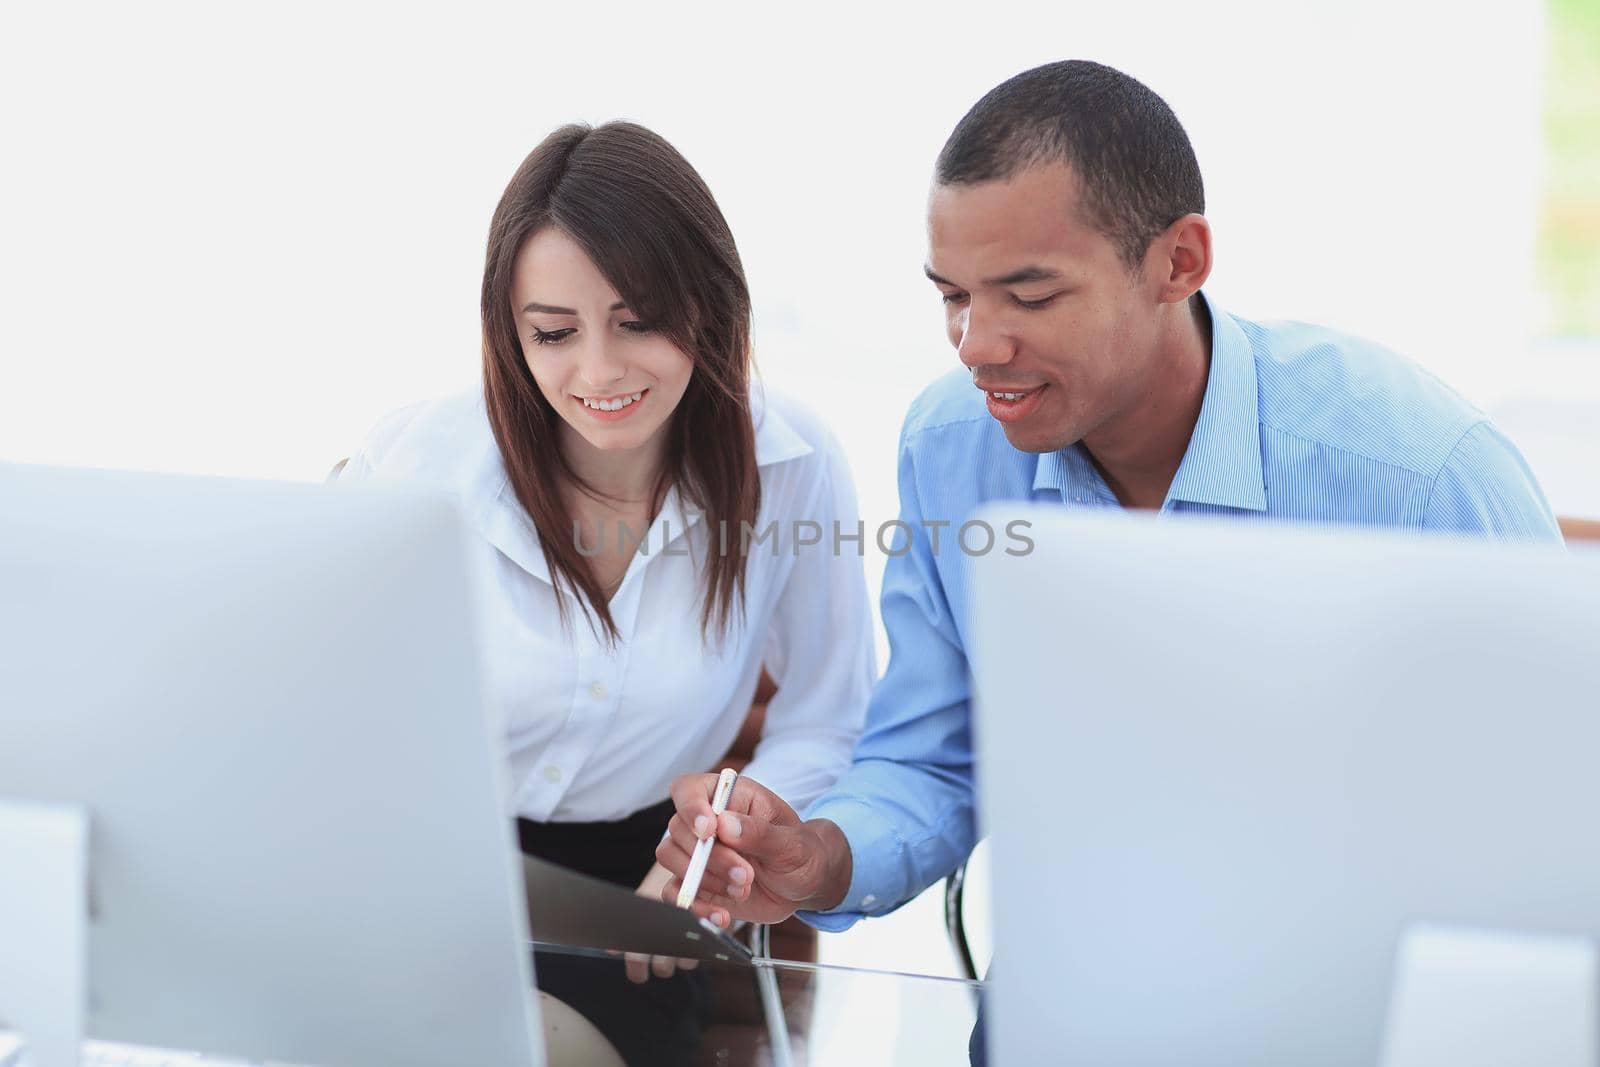 employees discussing financial documents sitting at a Desk .photo with copy space